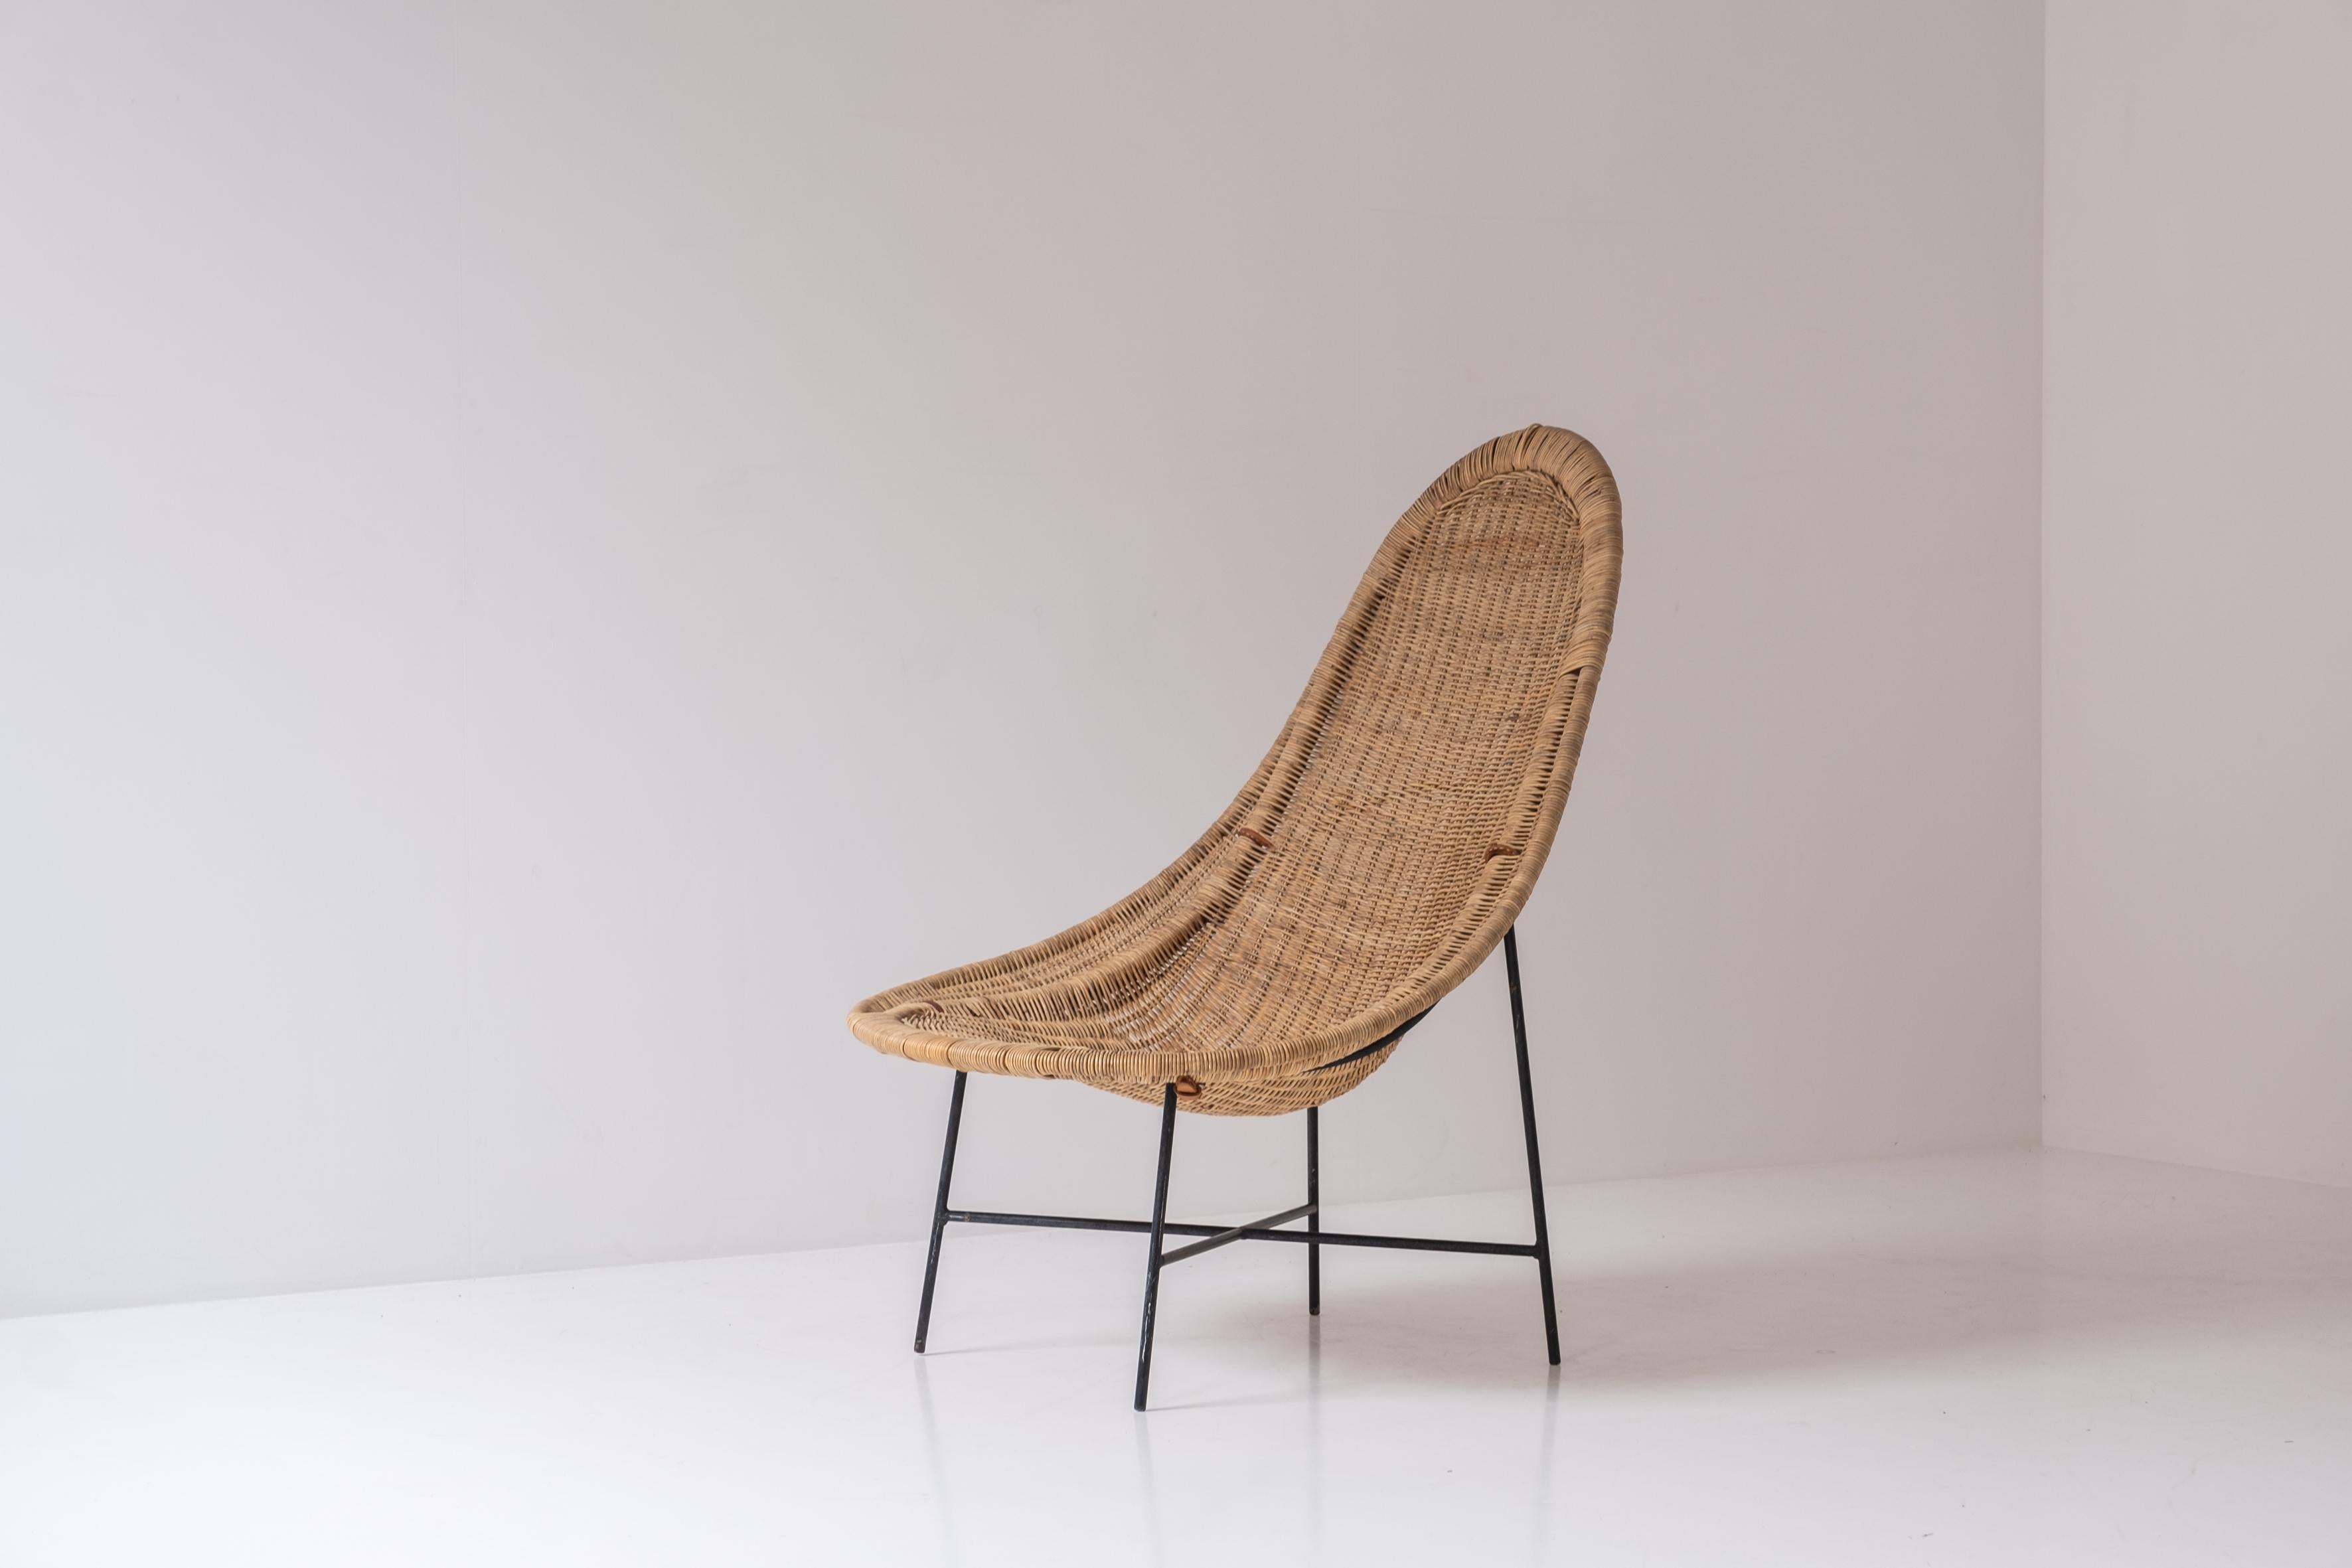 ‘Stora Kraal’ lounge chair by Kerstin Hörlin-Holmquist for Nordiska Kompaniet, Sweden 1952. This elegant side chair features lacquered metal, wicker and brown leather straps. Exceptional Swedish craftsmanship. Some age related marks, but overall in